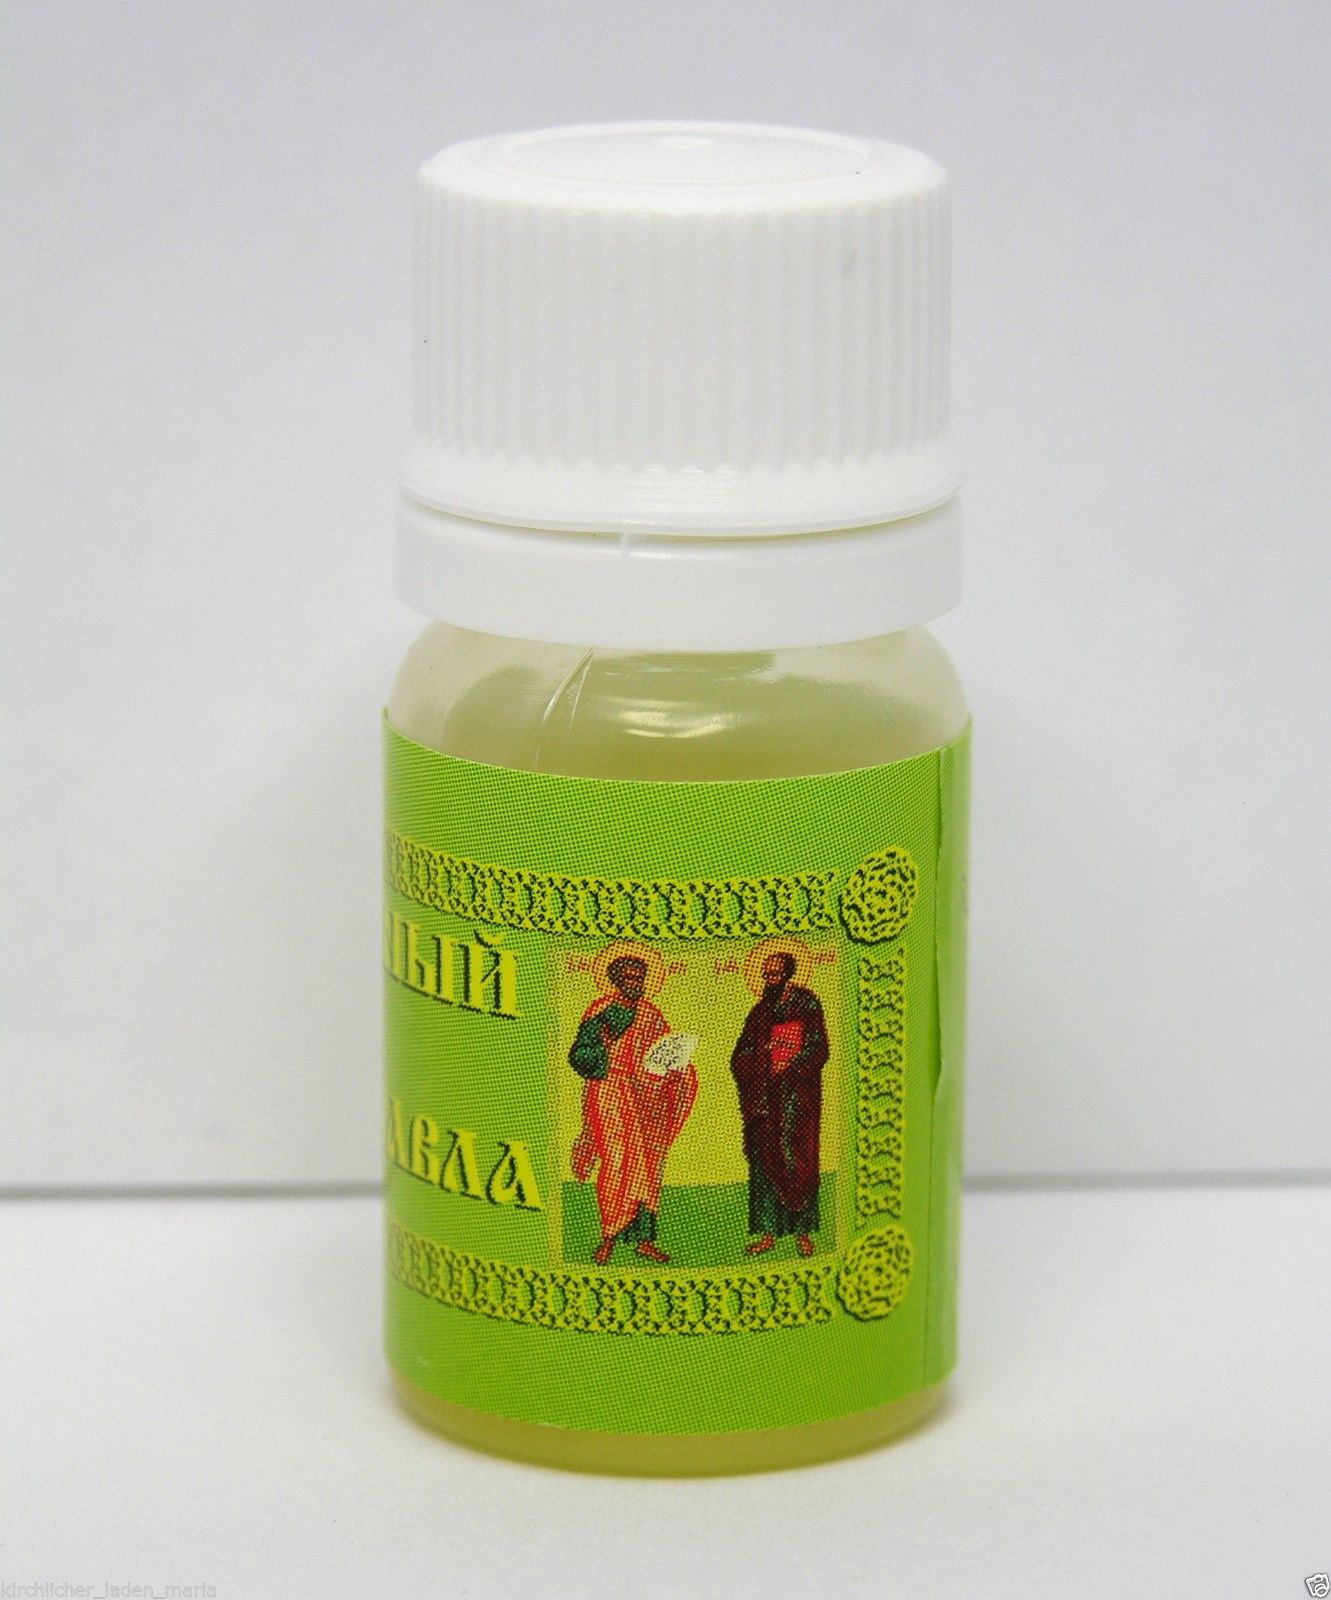 Oil consecrated near the icon "Peter and Paul" 10ml